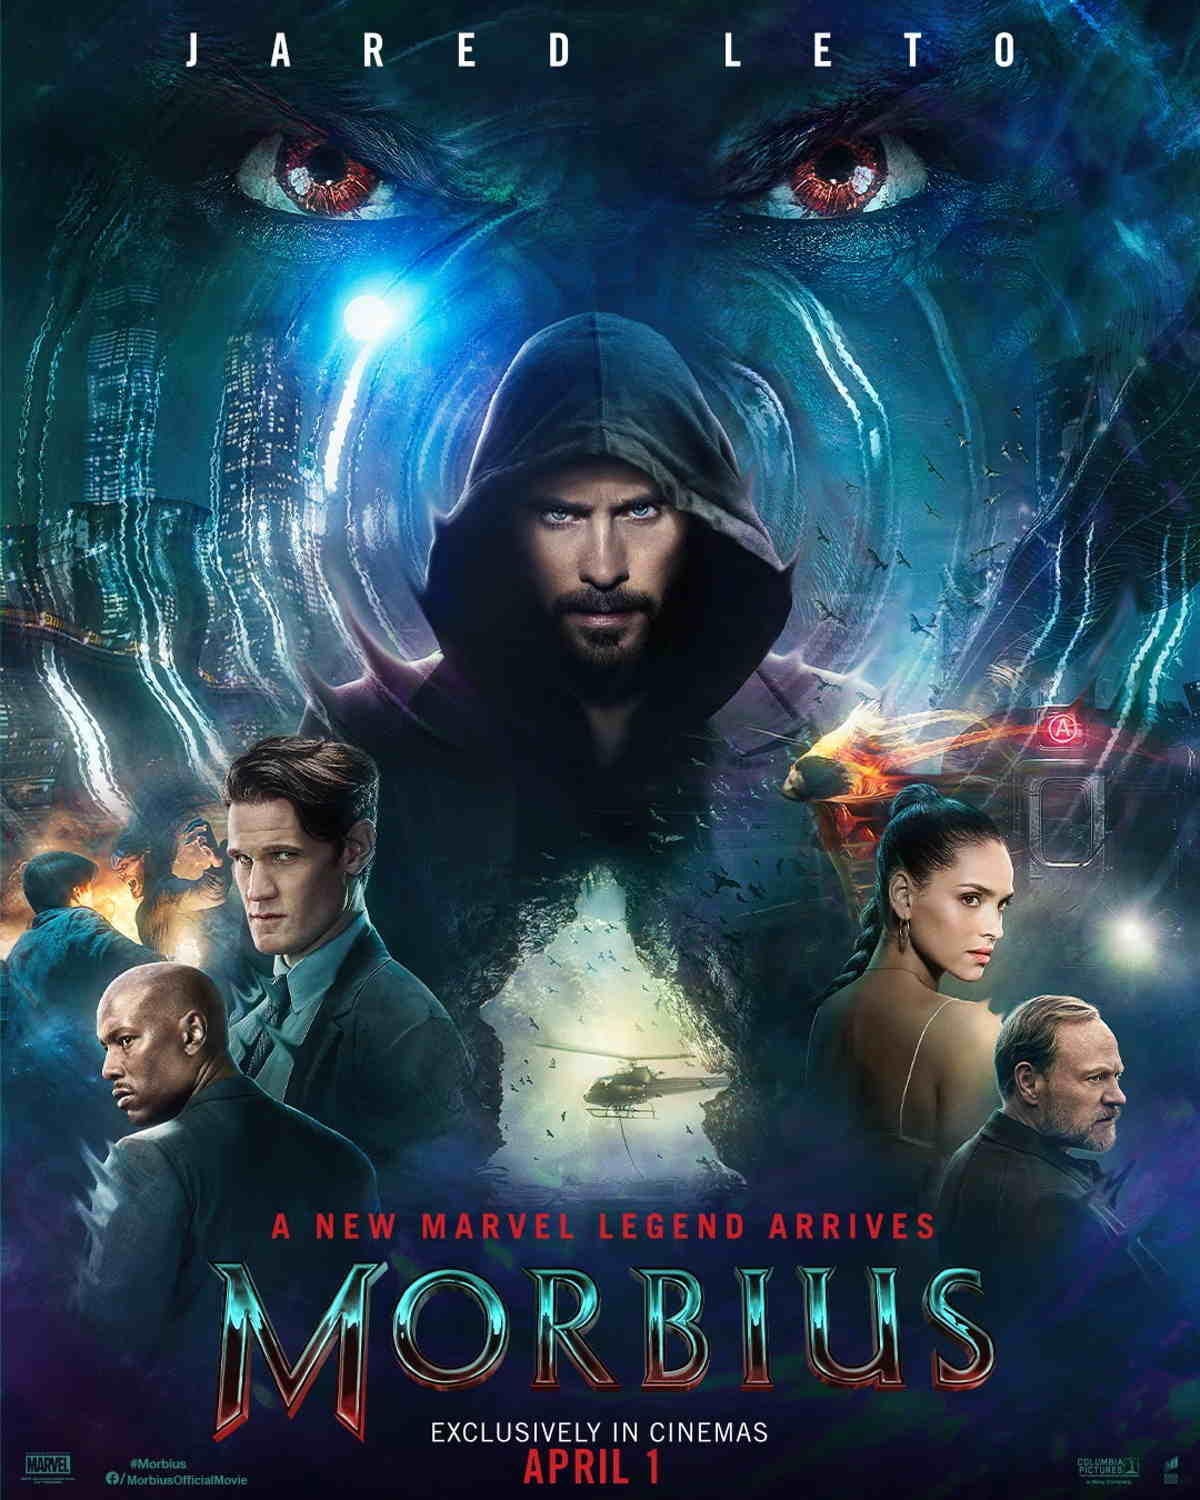 Spider-Man Spinoff Morbius Starring Jared Leto Gets a New Poster